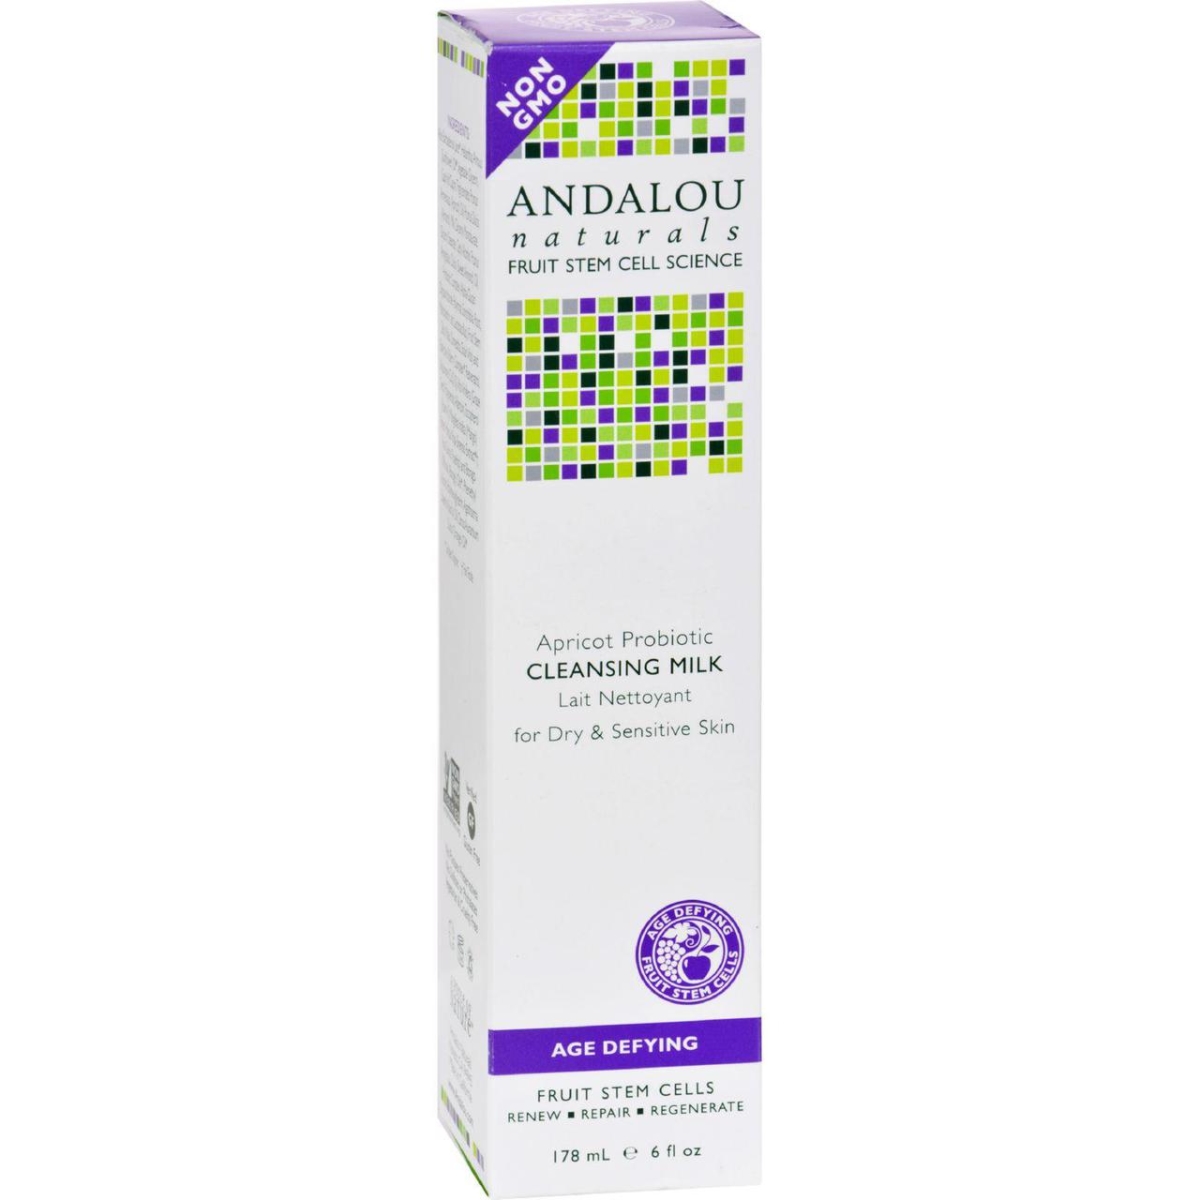 Picture of Andalou Naturals HG0786616 6 fl oz Cleansing Milk for Dry Sensitive Skin Apricot Probiotic